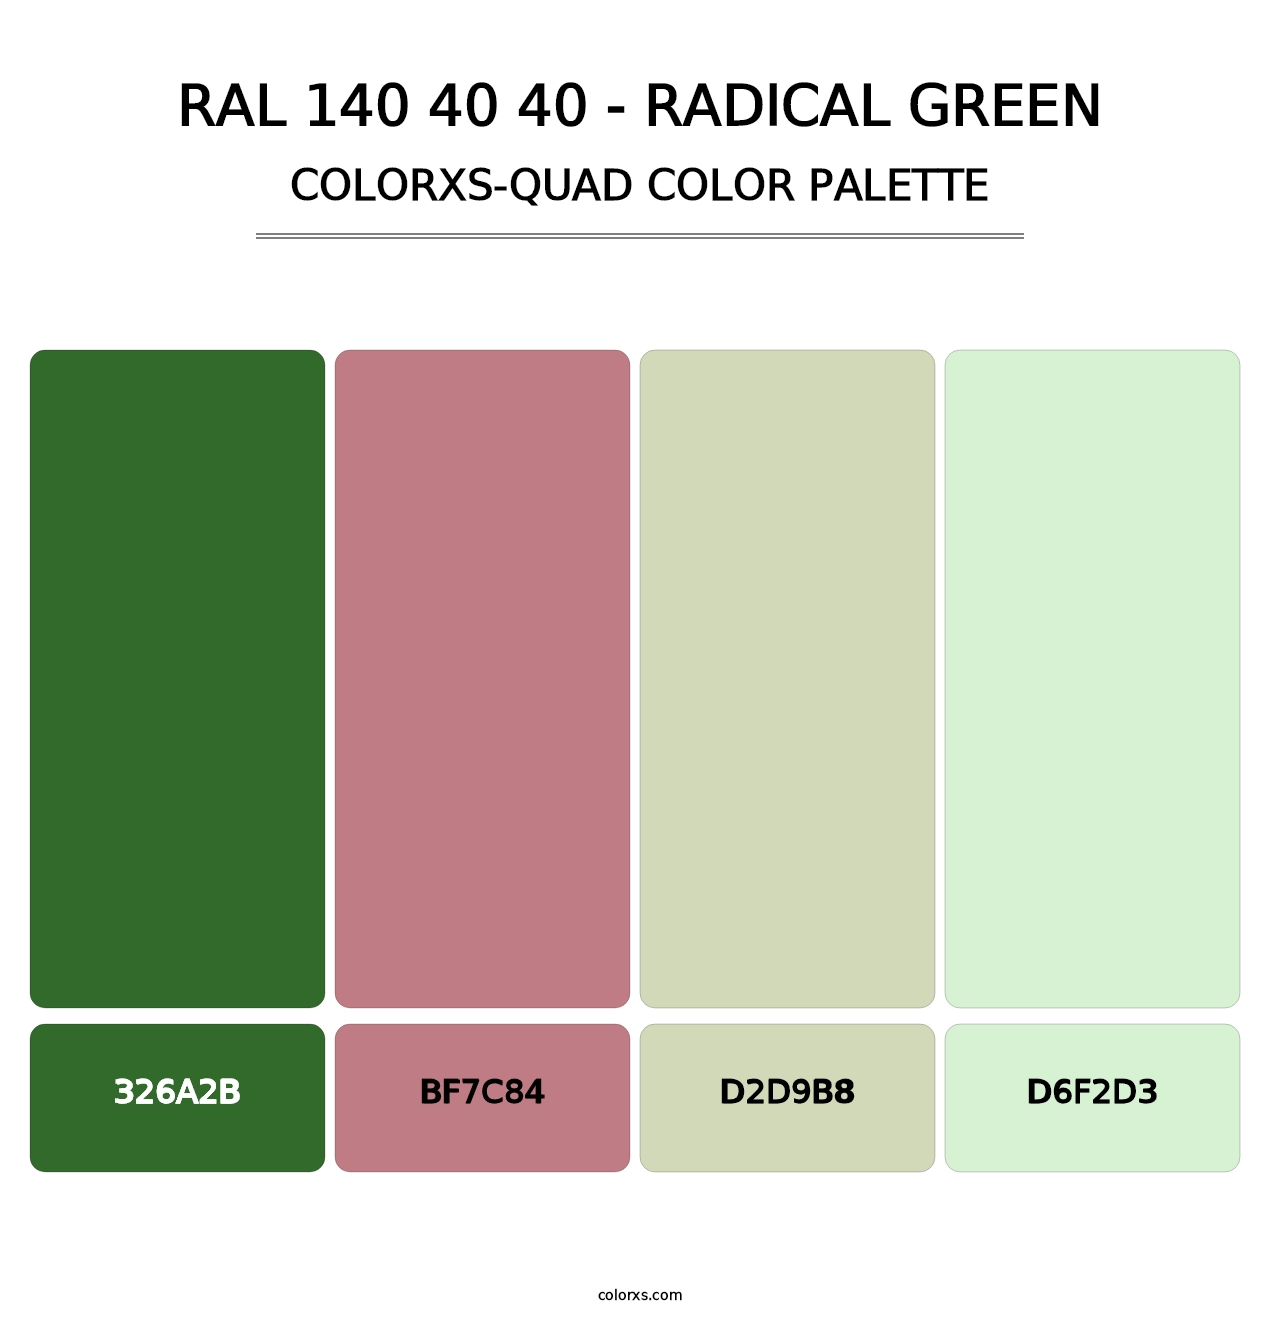 RAL 140 40 40 - Radical Green - Colorxs Quad Palette